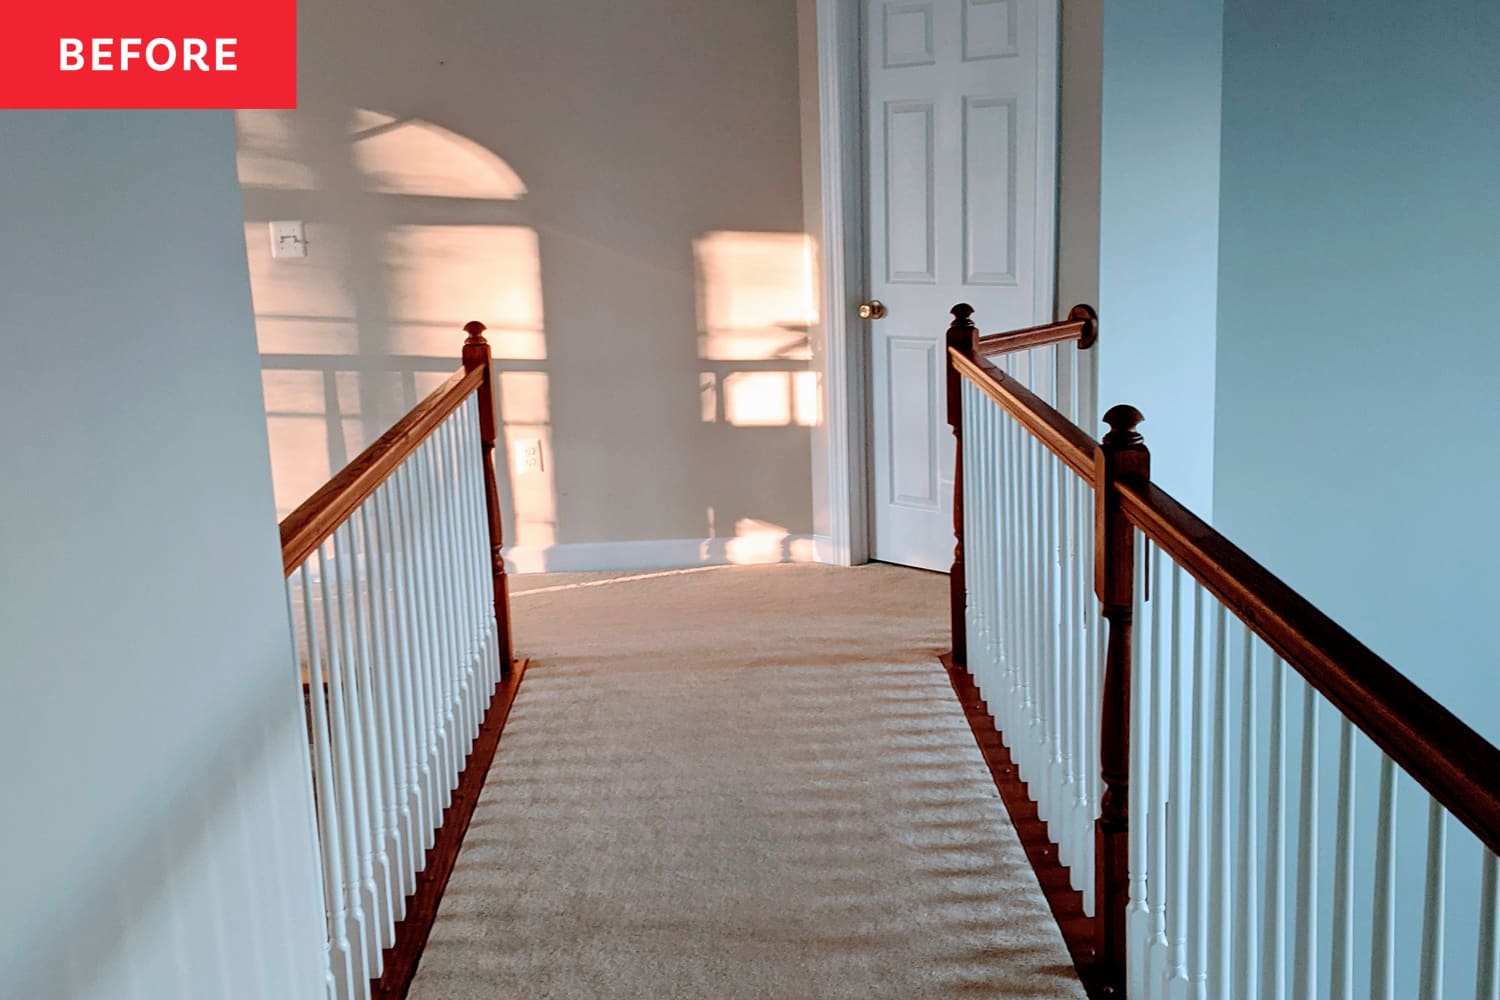 Before and After: An Empty Stair Landing Gets a Stylish Redo That’s Surprisingly Practical, Too